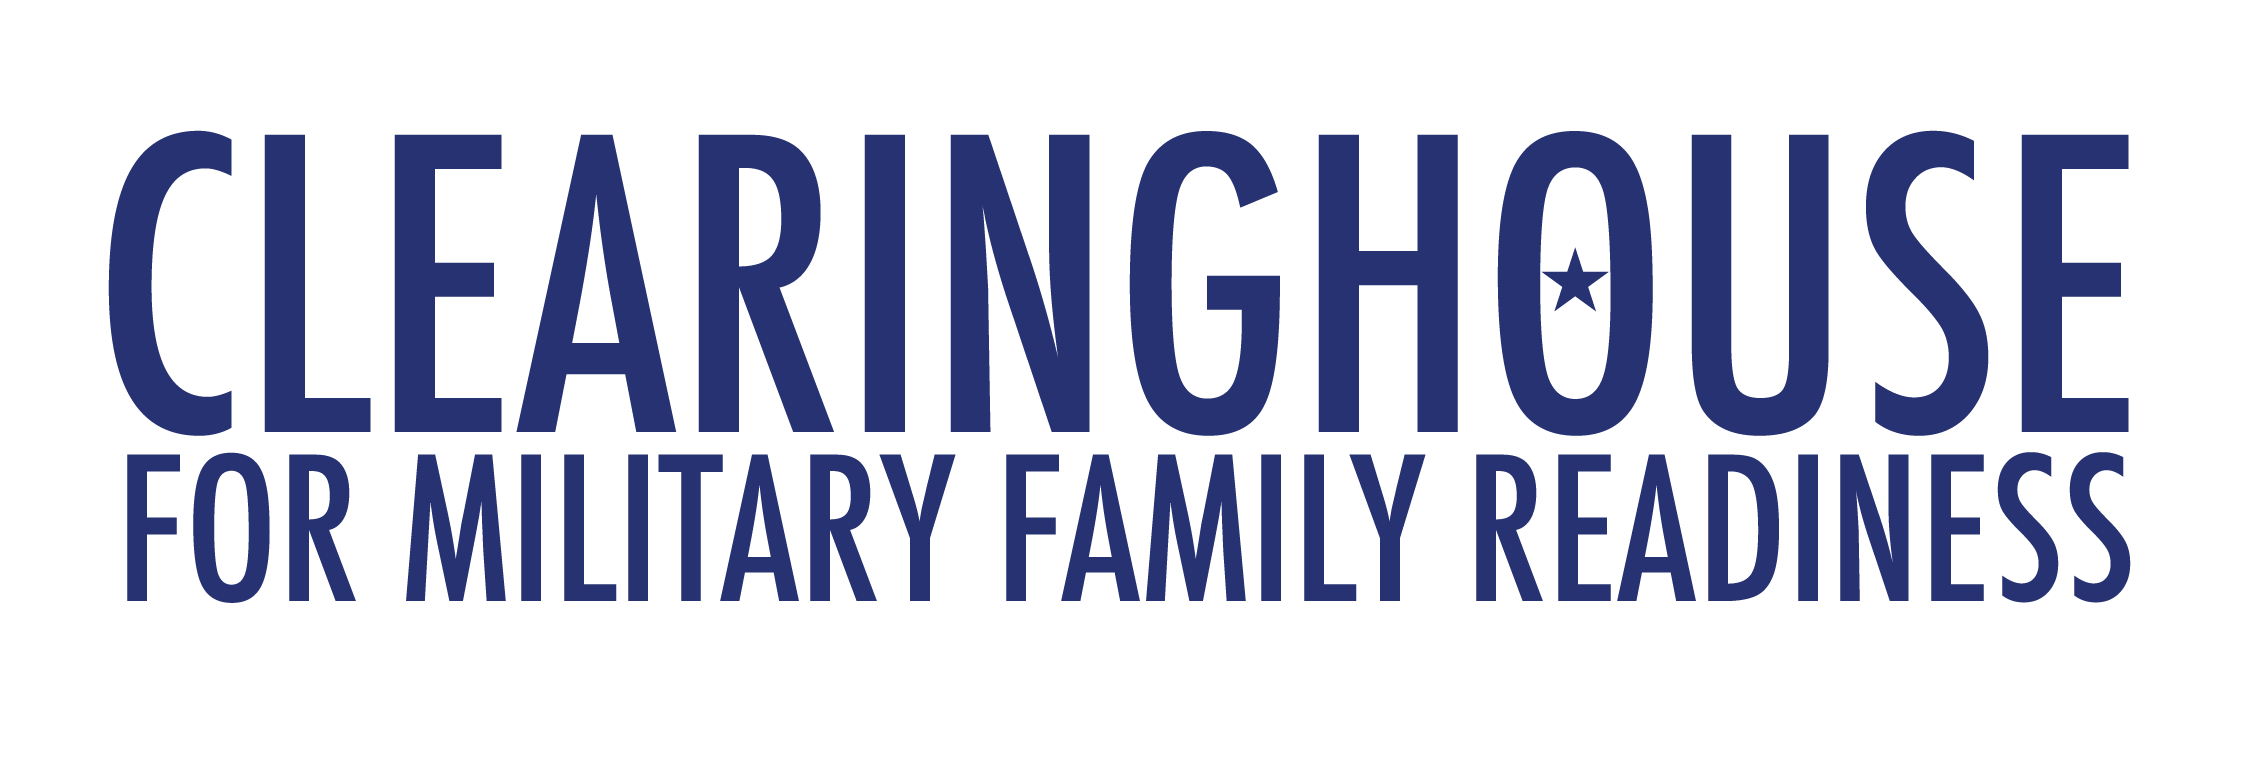 Clearinghouse logo in blue letters.